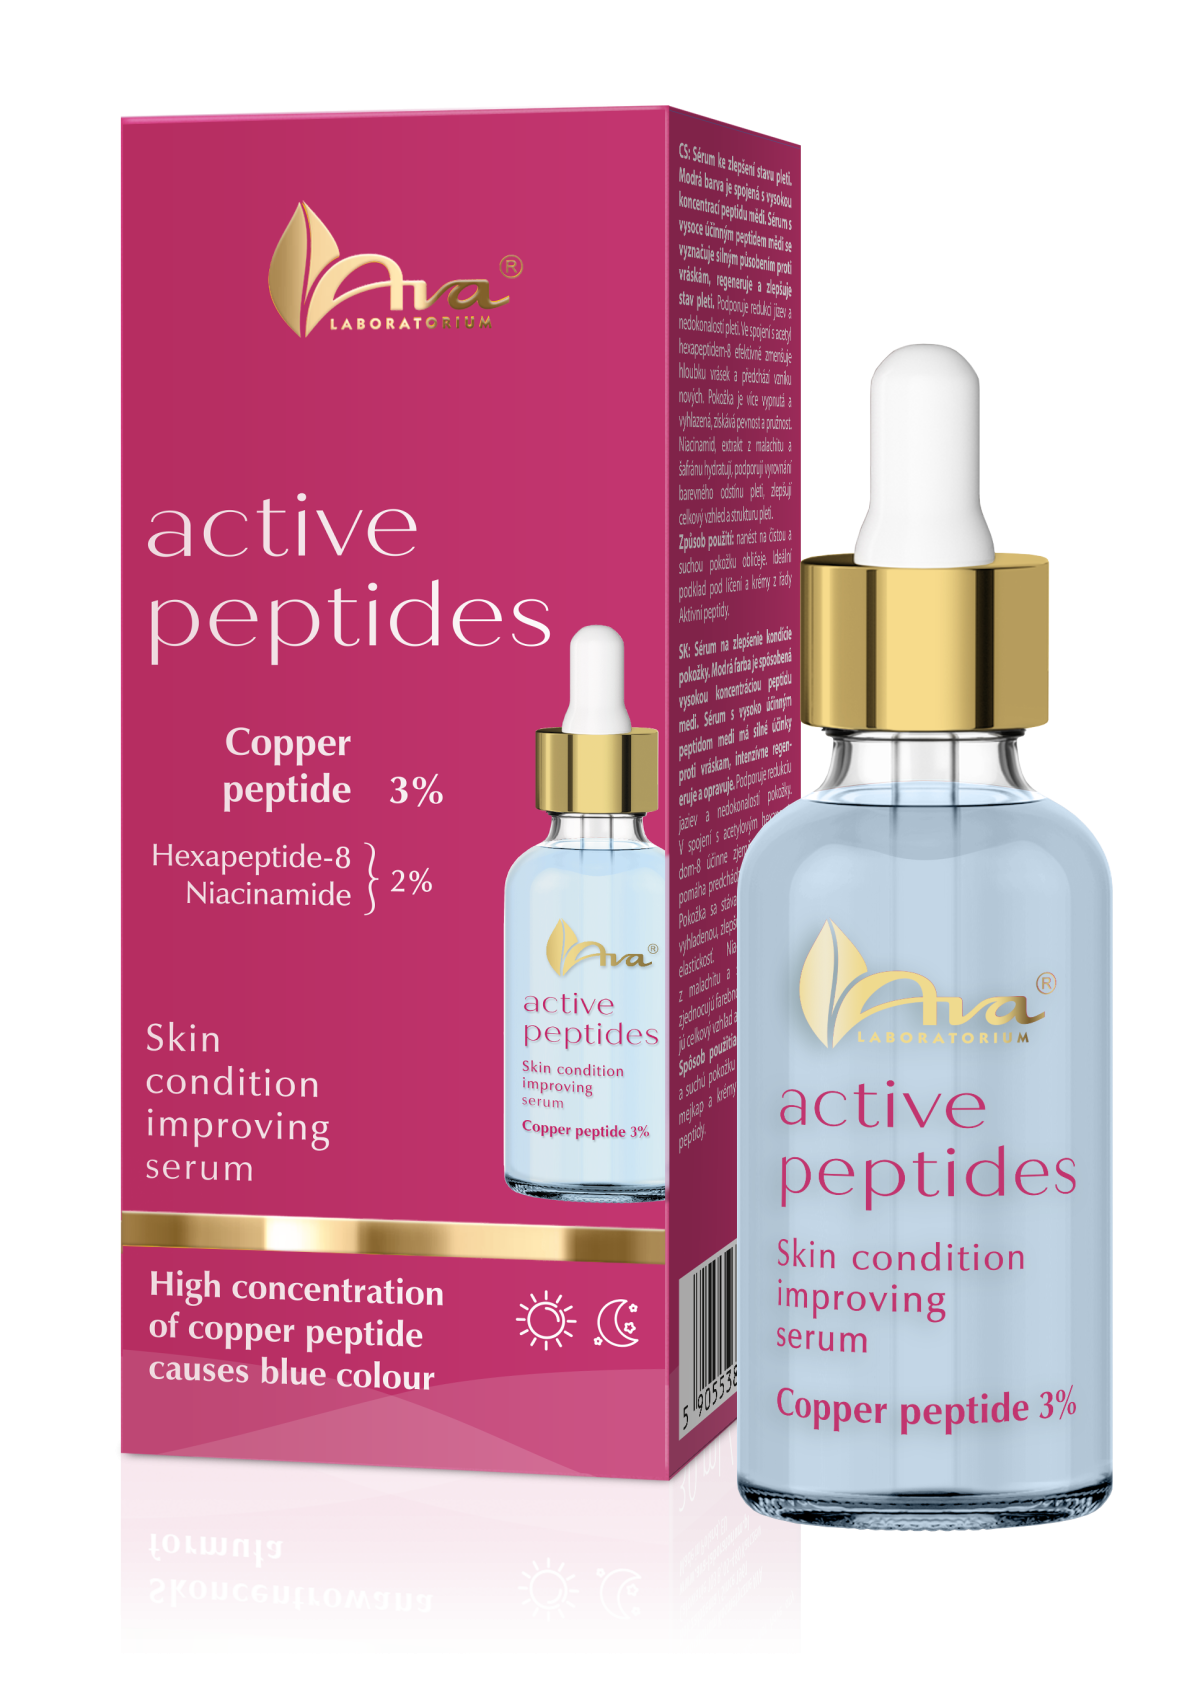 Active Peptides – Skin condition improving serum with copper peptide